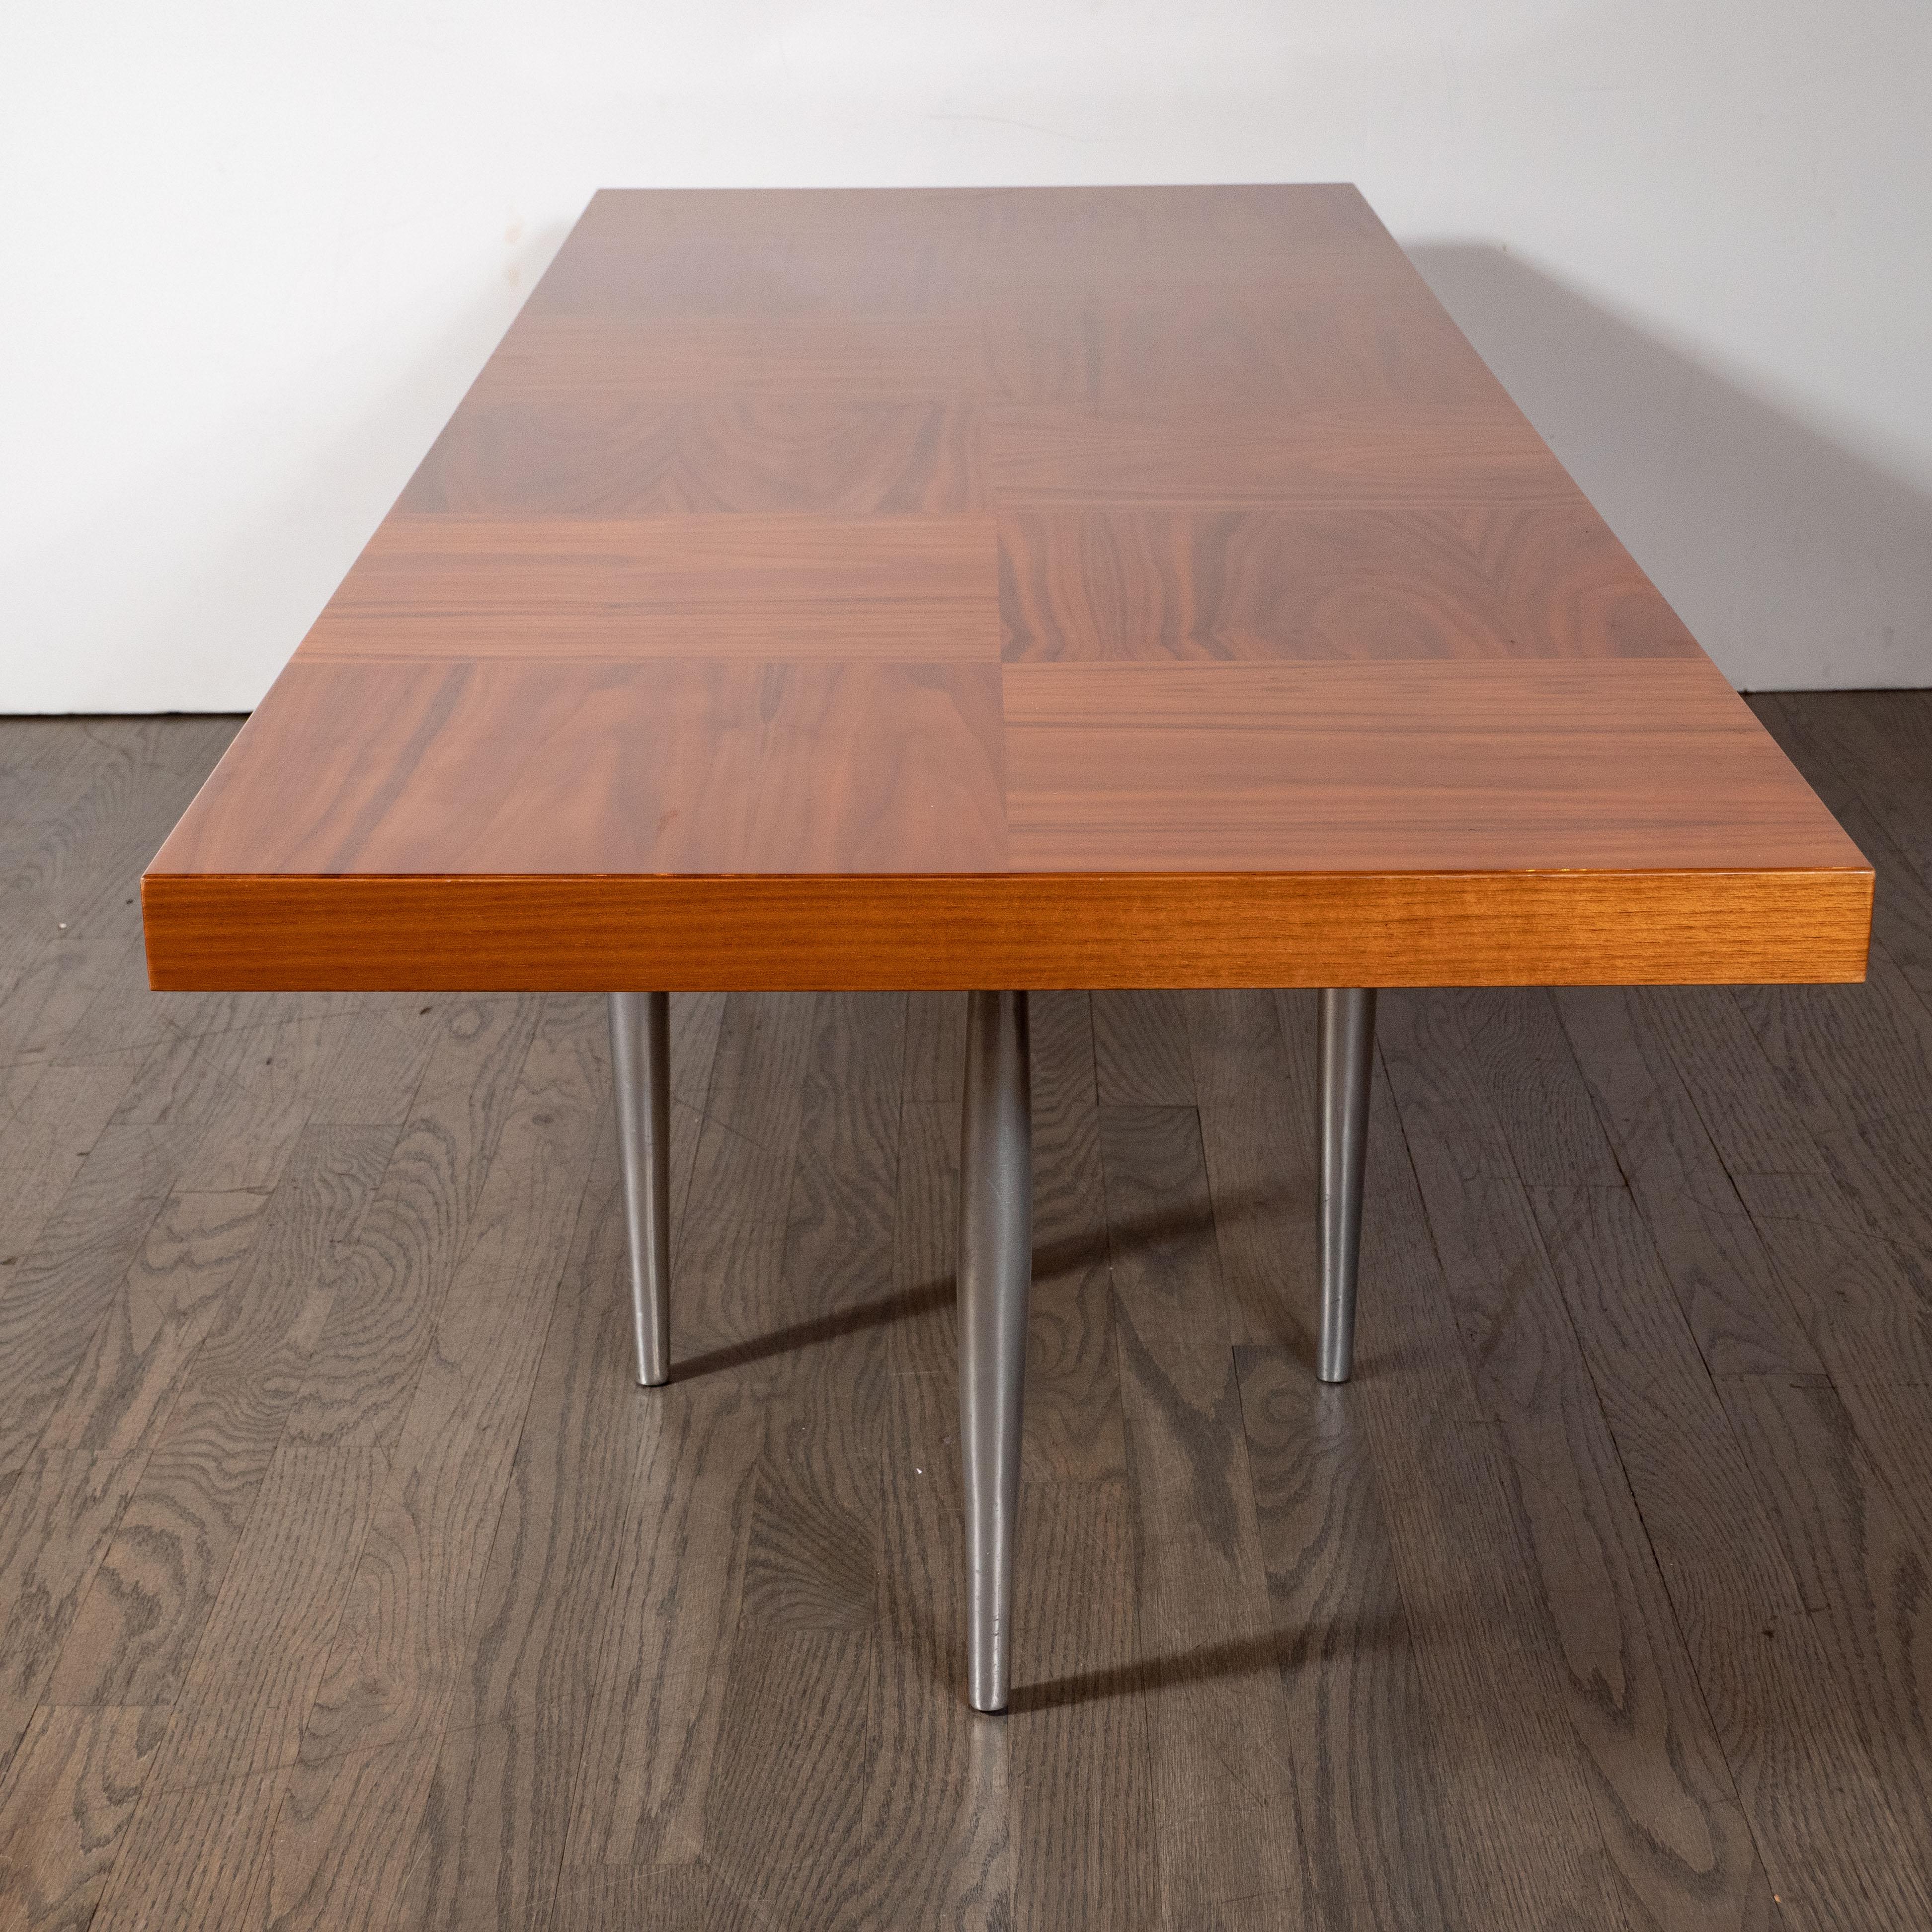 Midcentury Cocktail Table, Bookmatched Walnut Top and Sculptural Aluminum Base 3